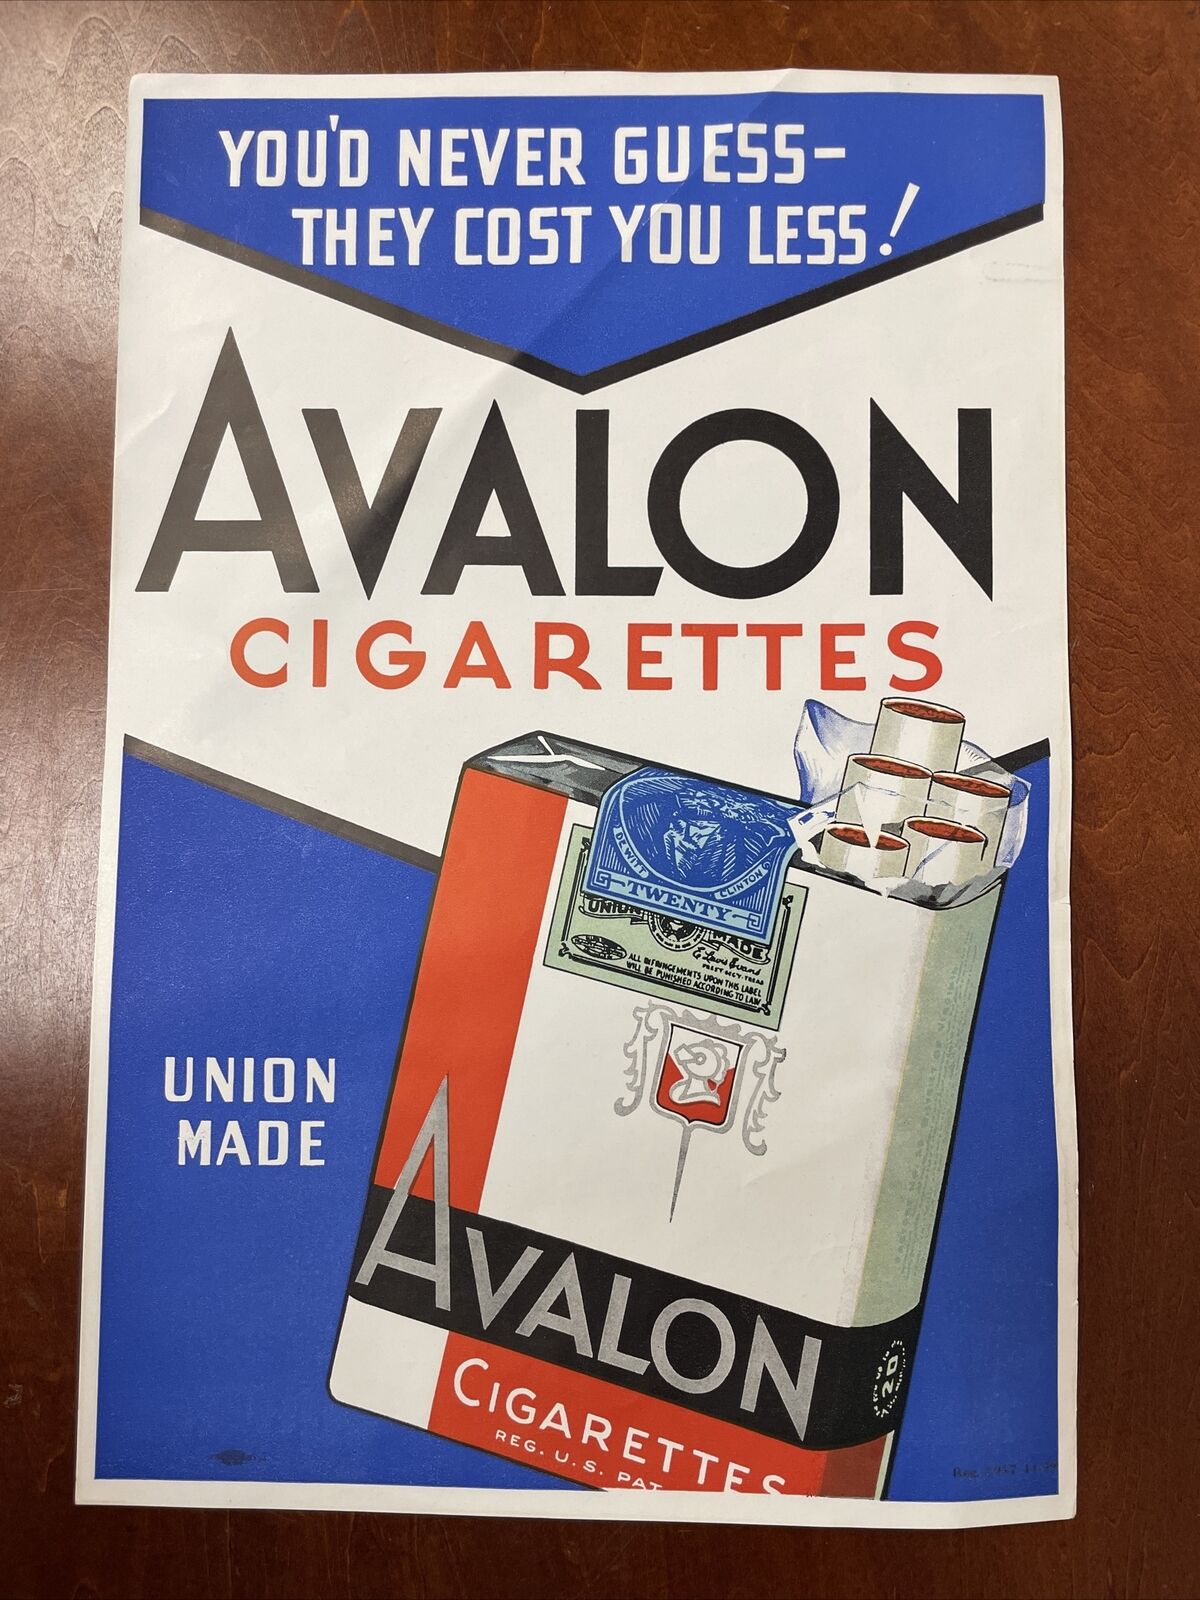   AVALON CIGARETTES STORE ADVERTISING WINDOW SIGN 1939 VINTAGE TOBACCO